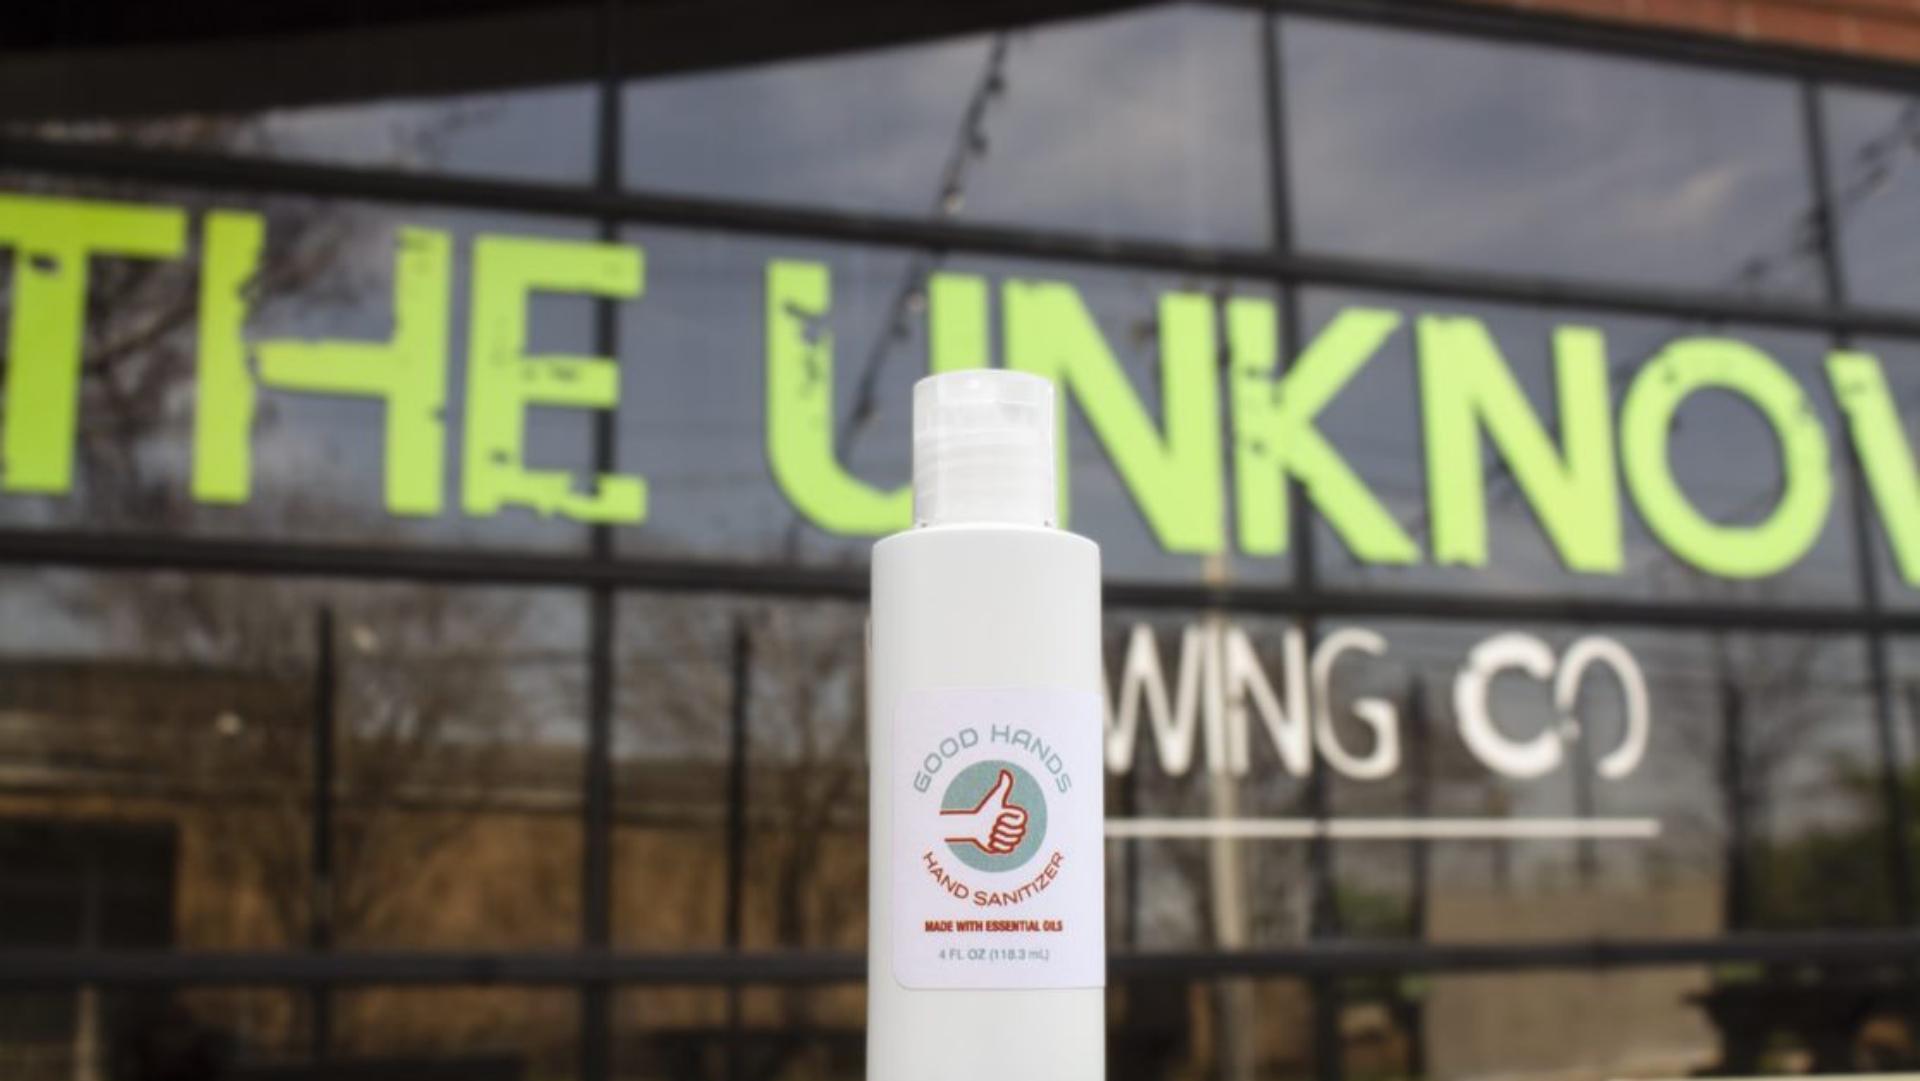 Resident Culture Brewing Co. and The Unknown Brewing Co. powered up their respective brewing tanks and stills to mix and donate more than 1,000 bottles of hand sanitizer for distribution across Atrium Health’s facilities.